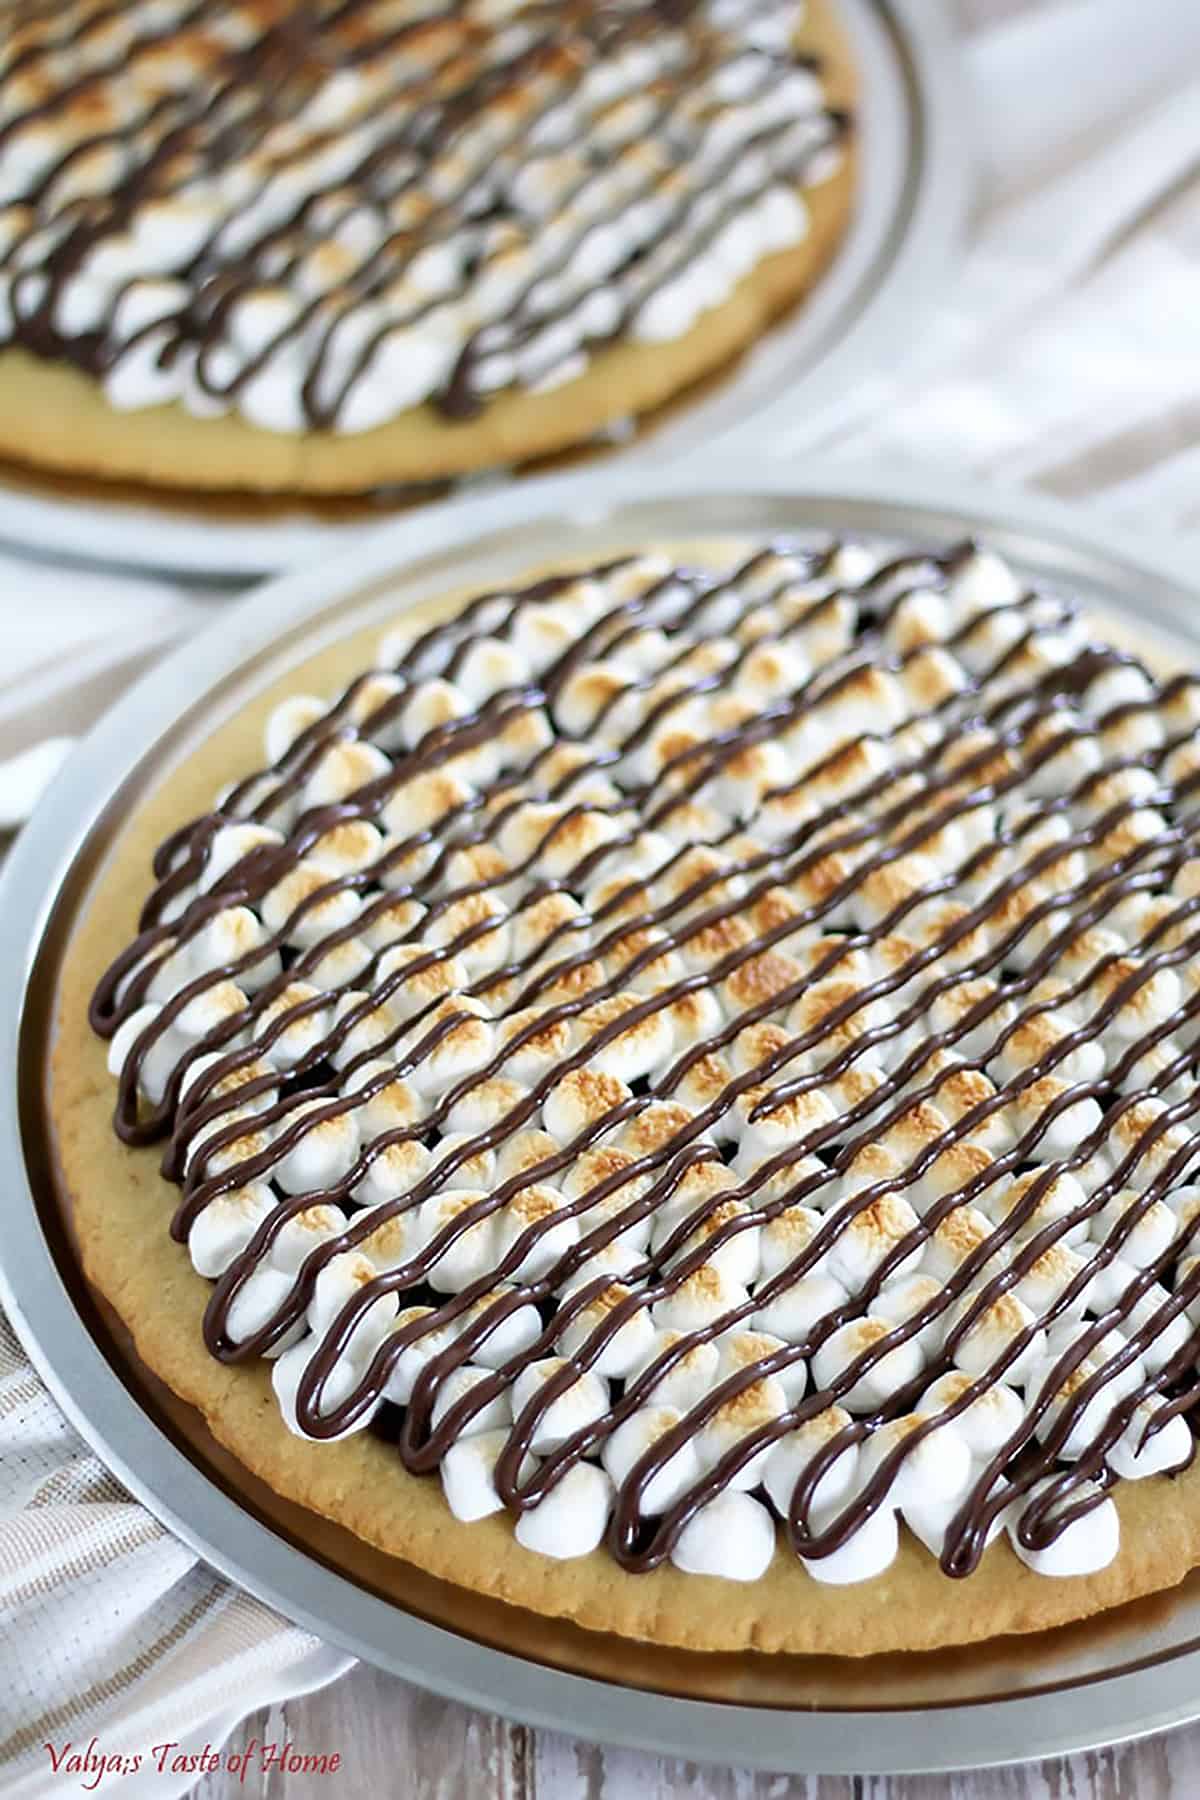 It features a homemade sugar cookie crust, with toasted mini marshmallows and melted chocolate chips to satisfy your sweet tooth.